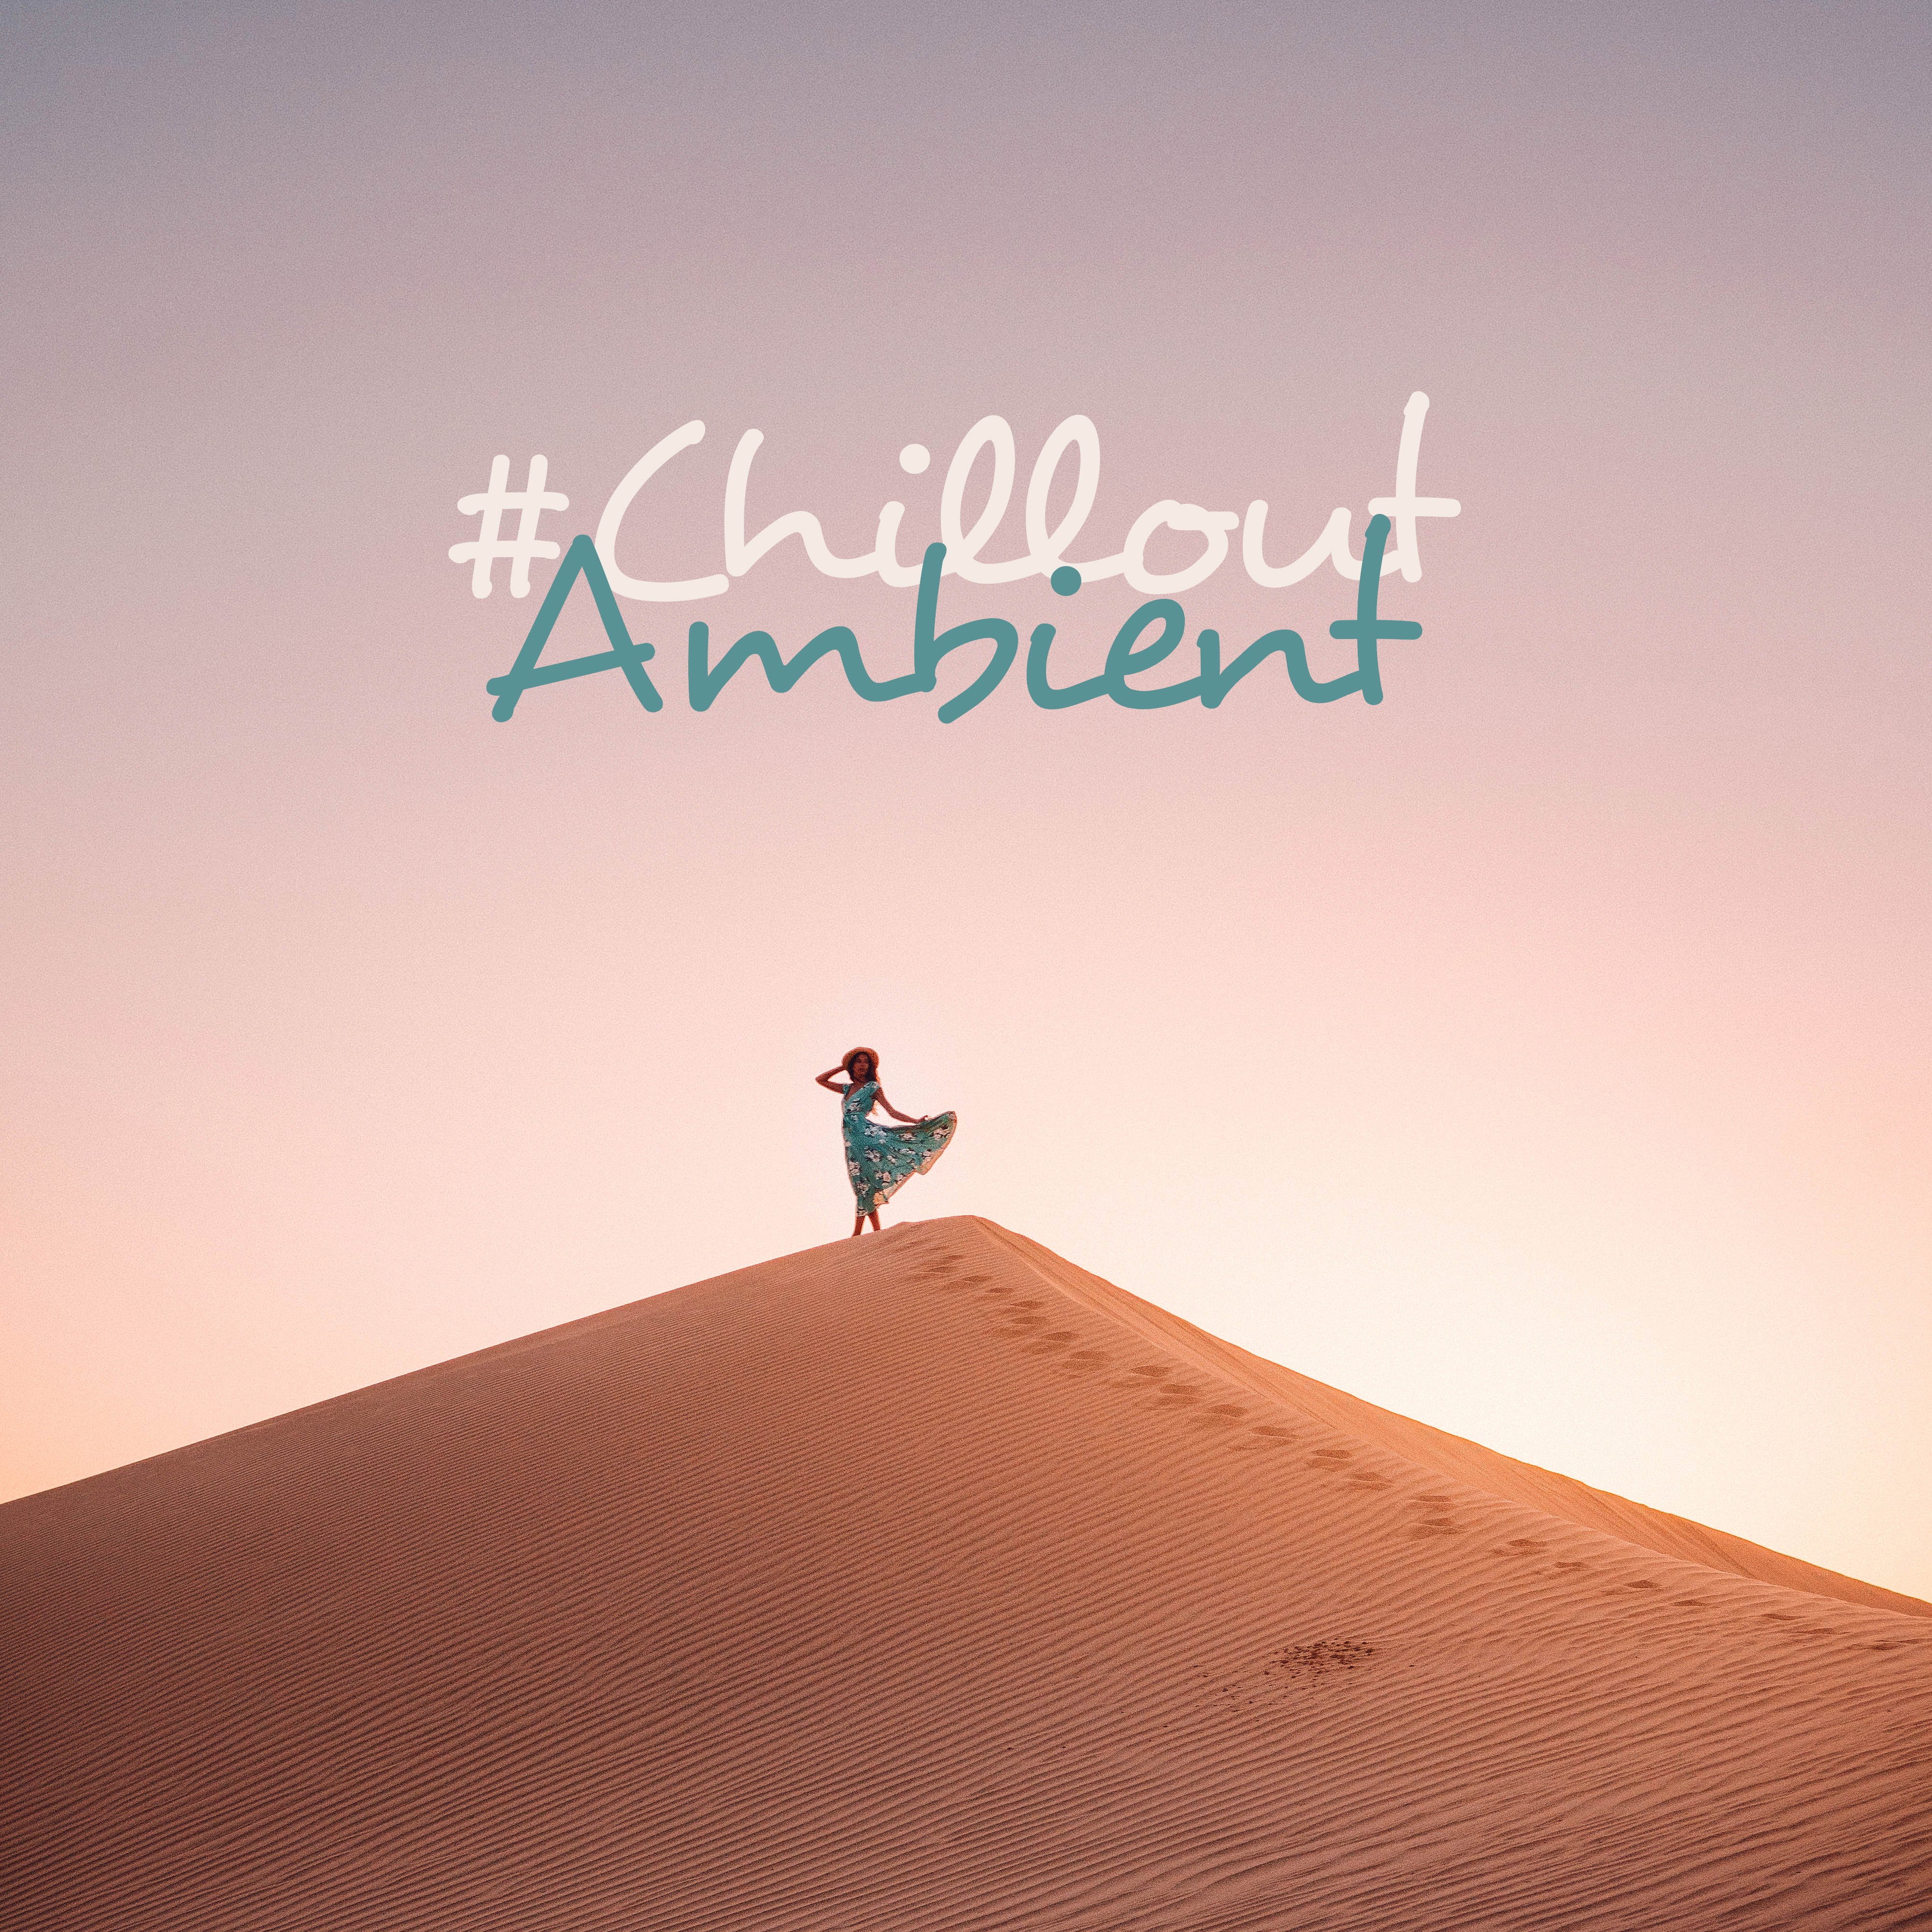 #Chillout Ambient